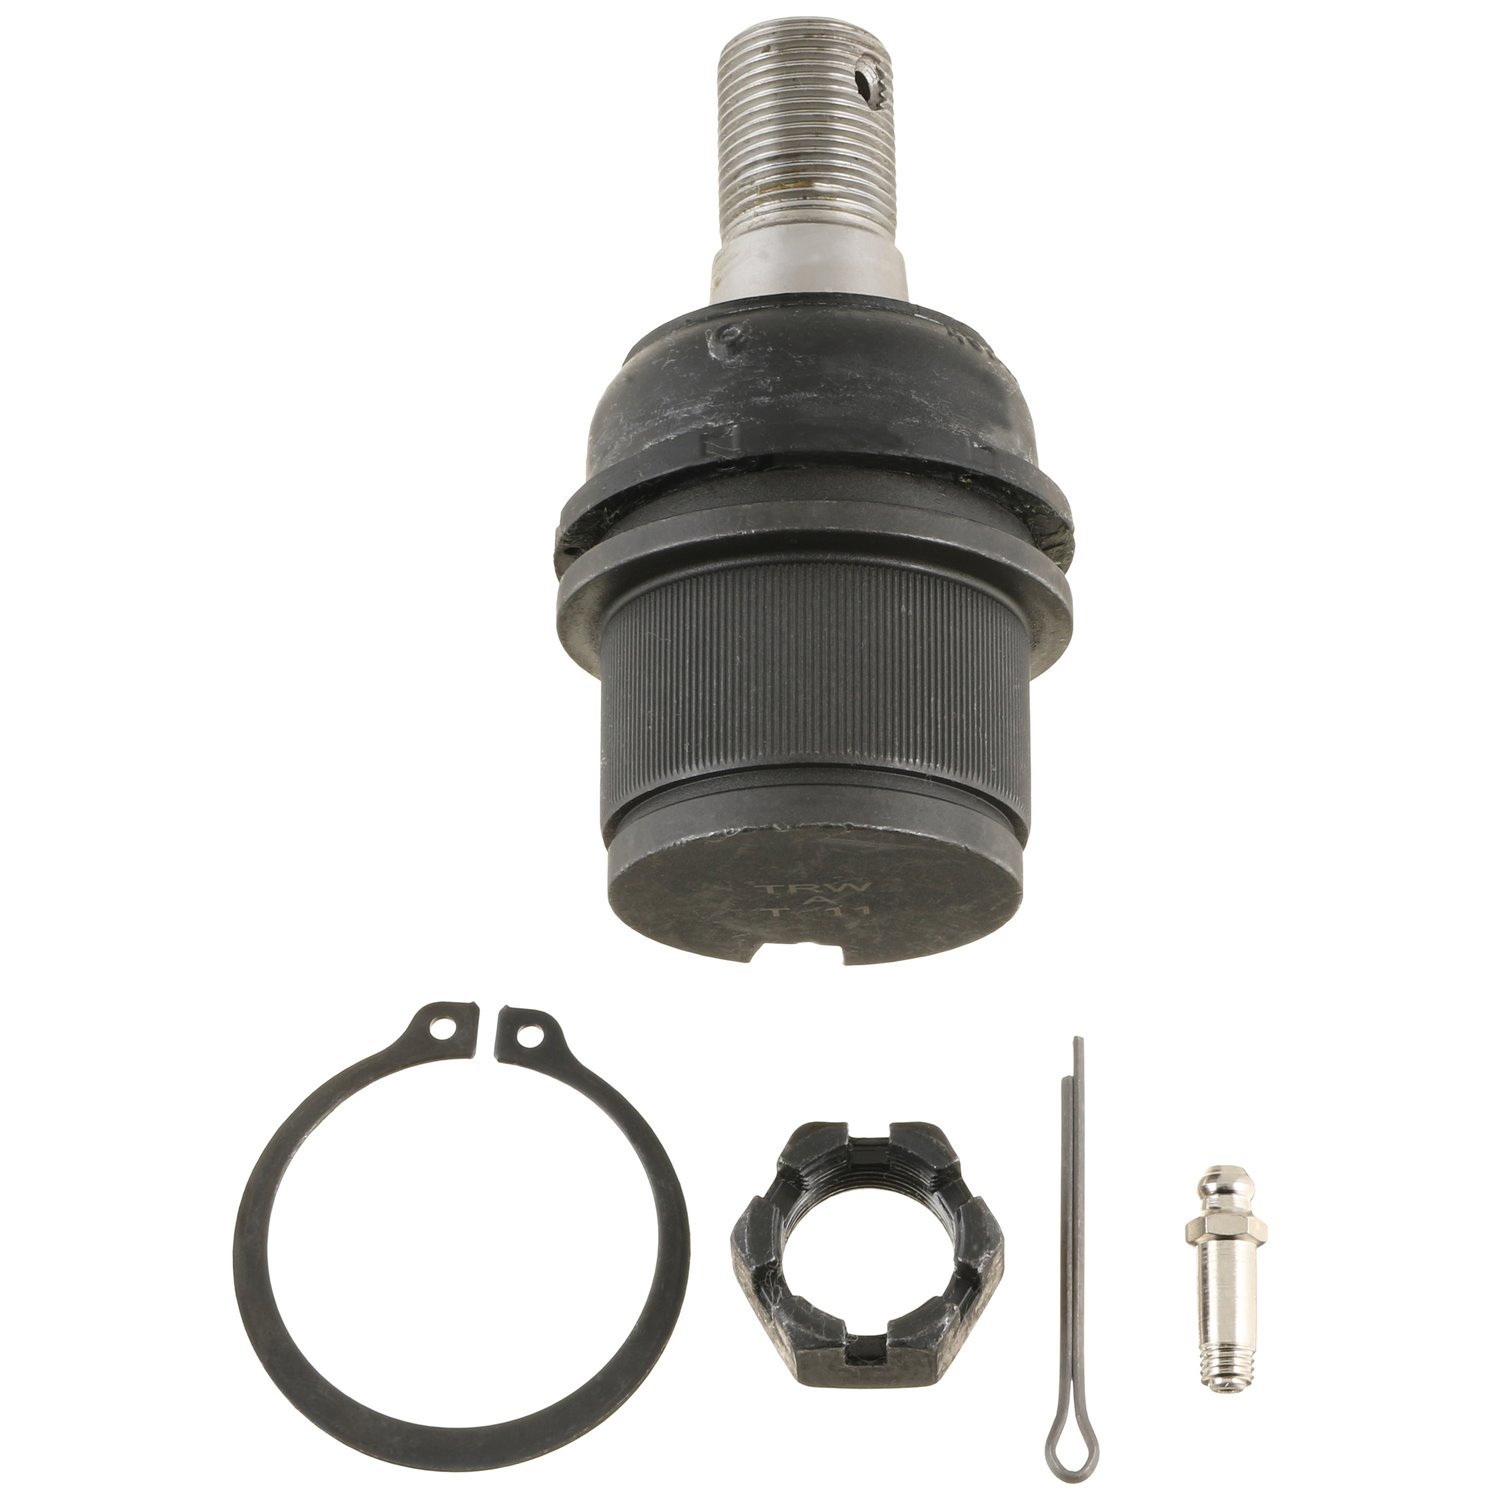 JBJ1206 Ball Joint Fits Select Dodge Models, Position: Left/Driver or Right/Passenger, Front Lower